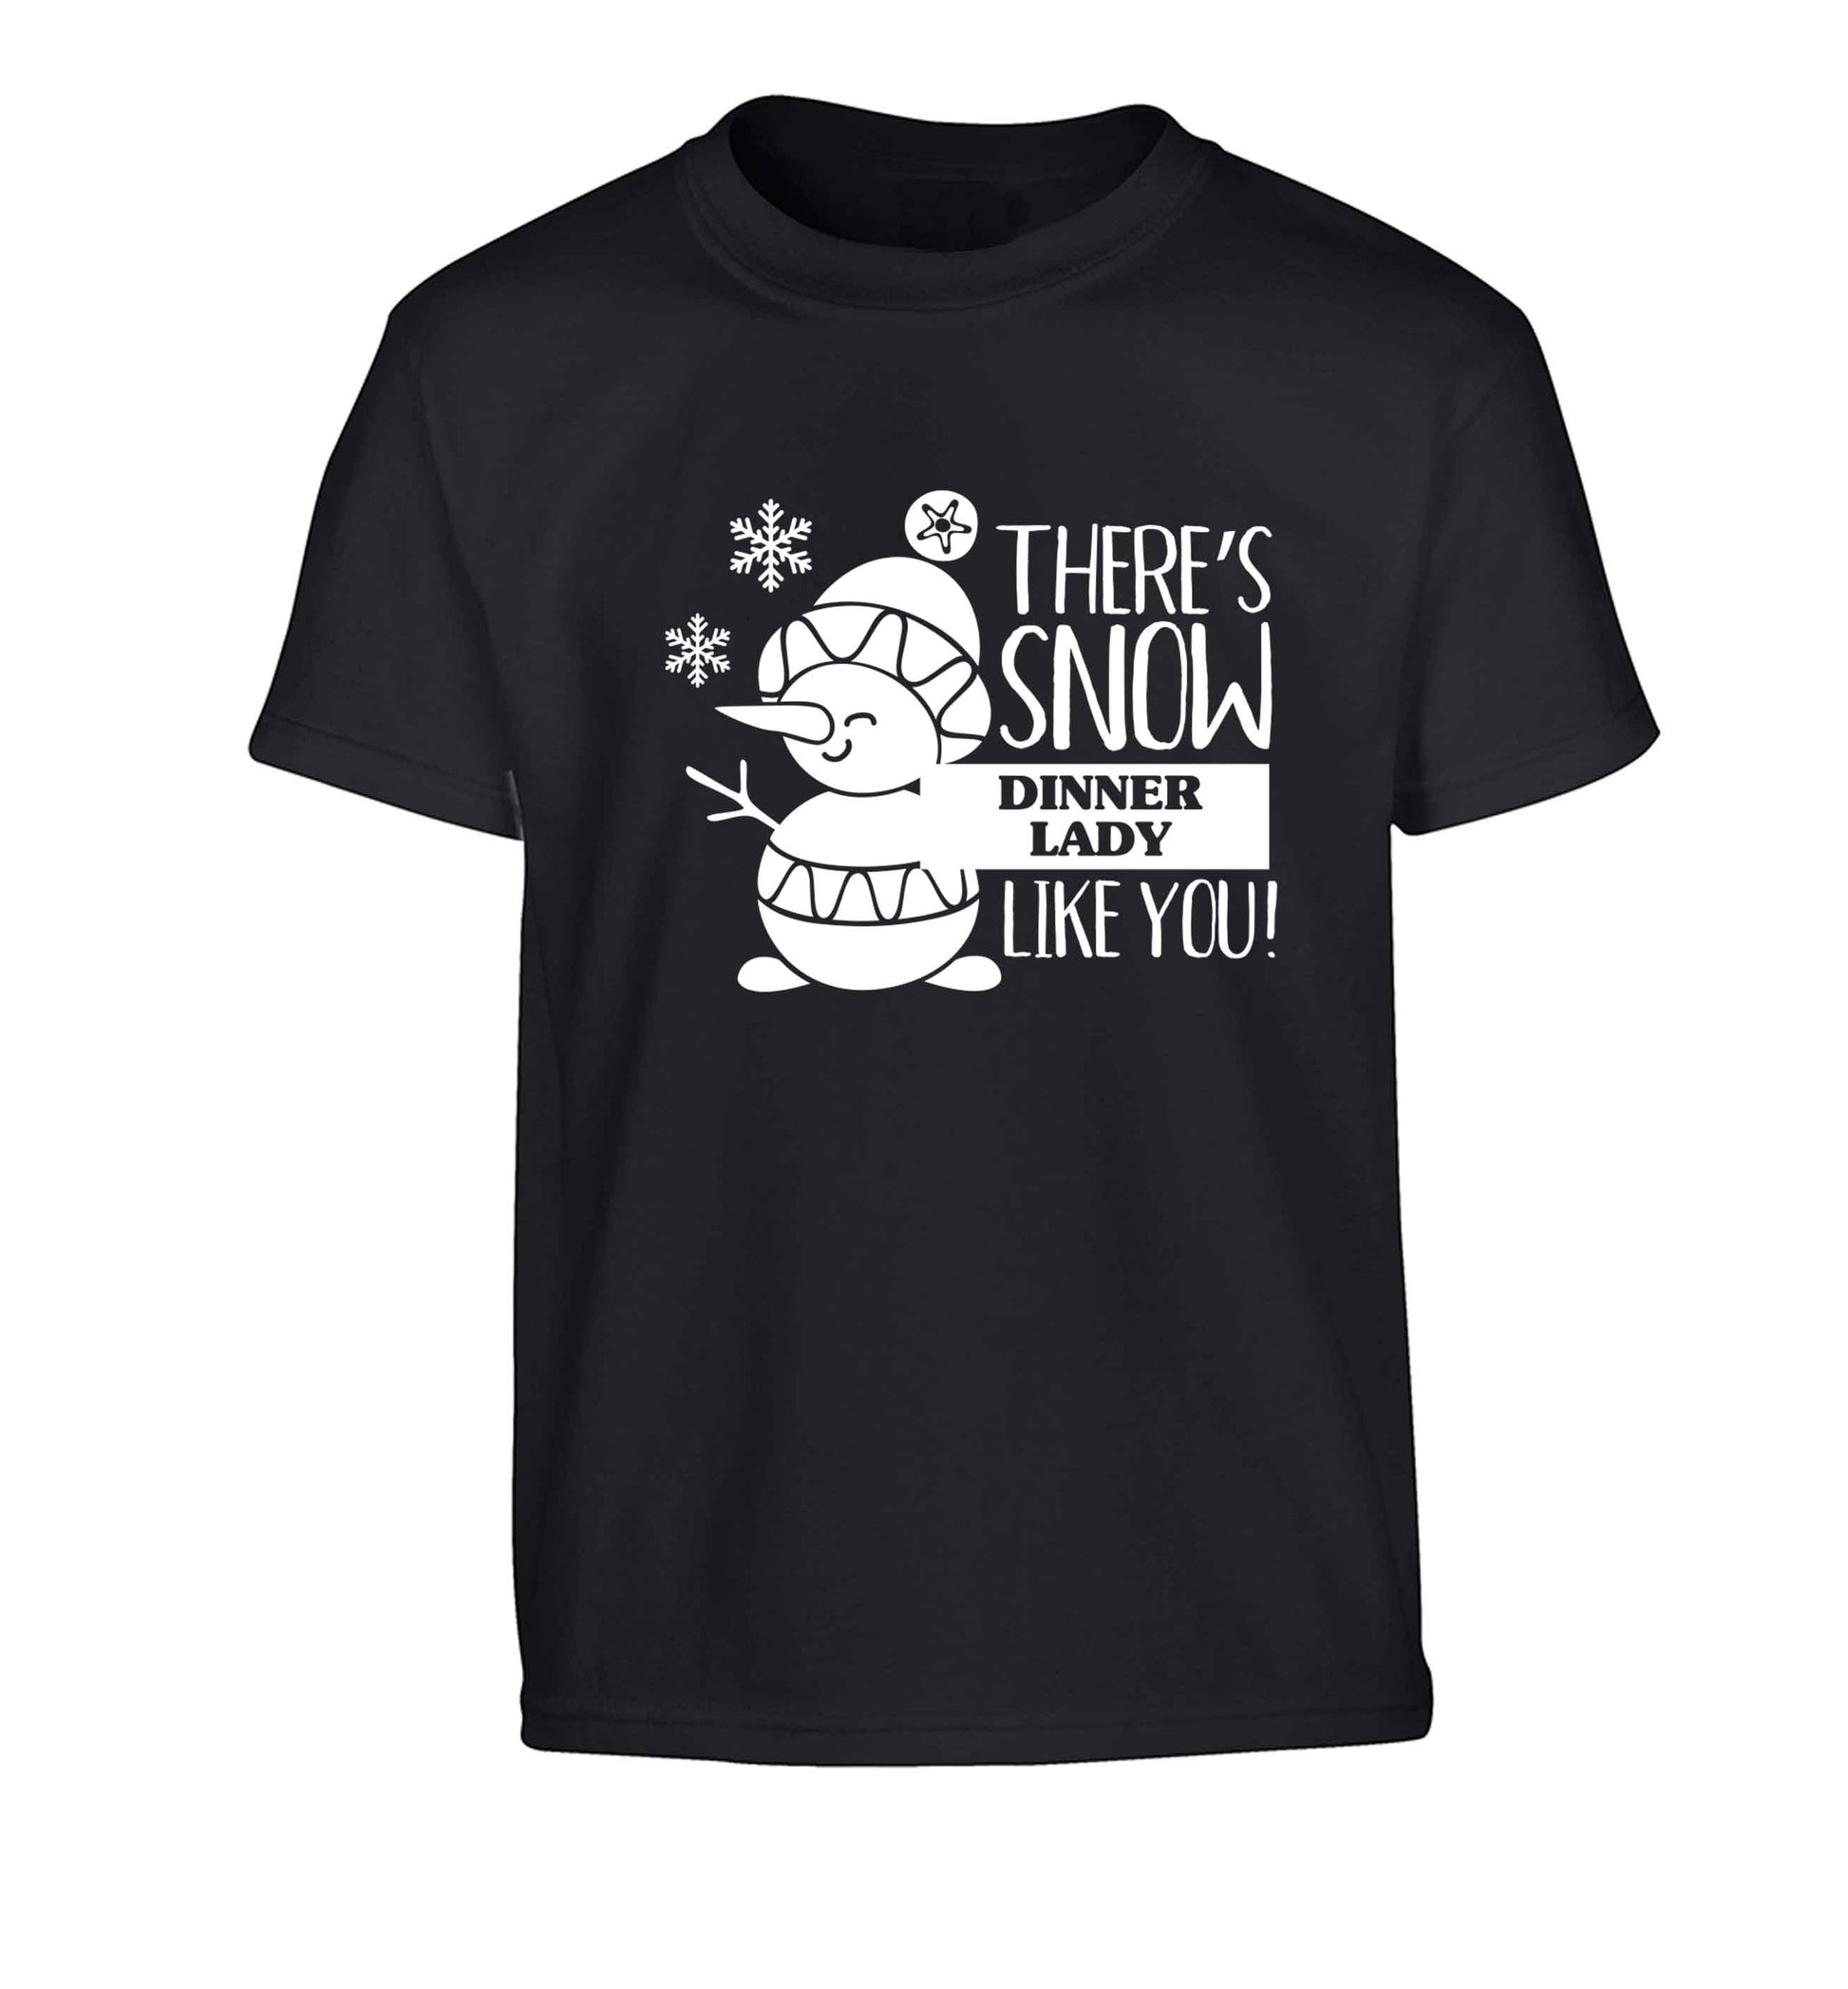 There's snow dinner lady like you Children's black Tshirt 12-13 Years